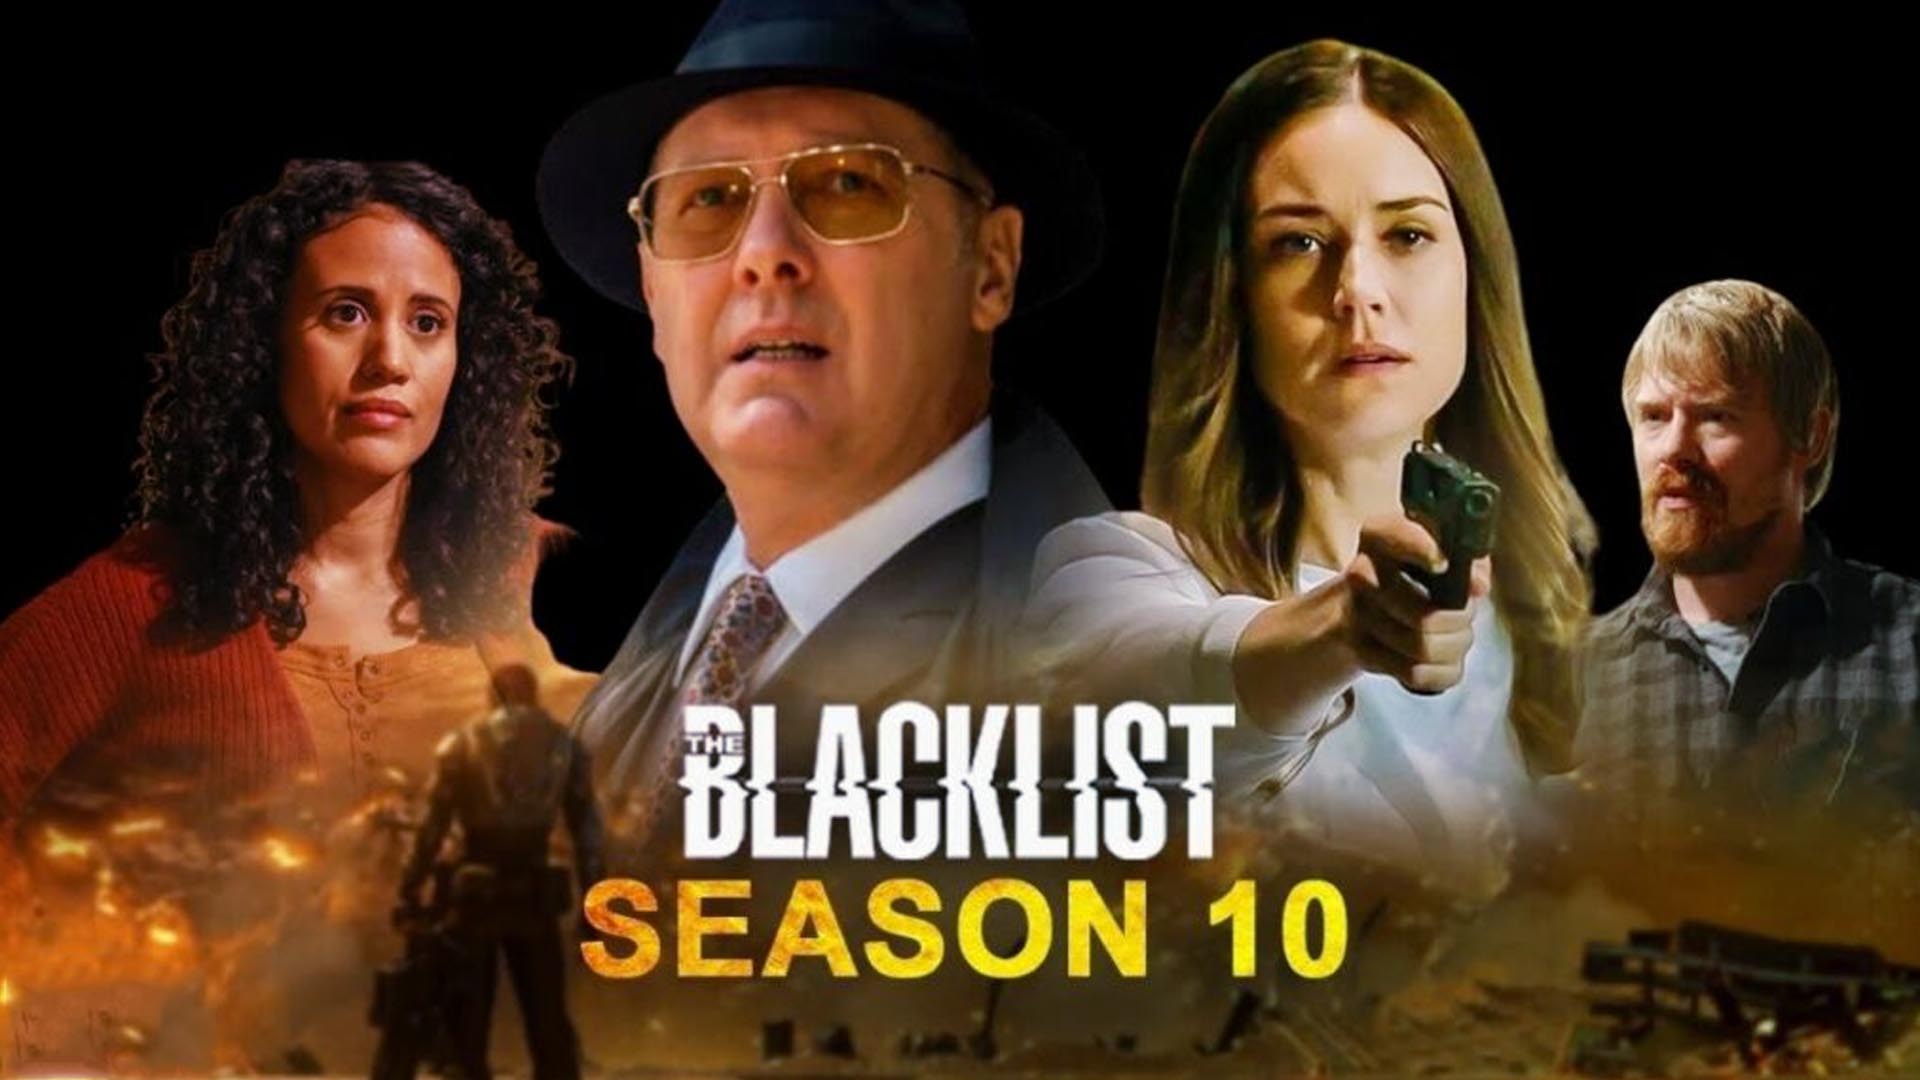 The Blacklist Season 10 What we know so far about it? Daily Research